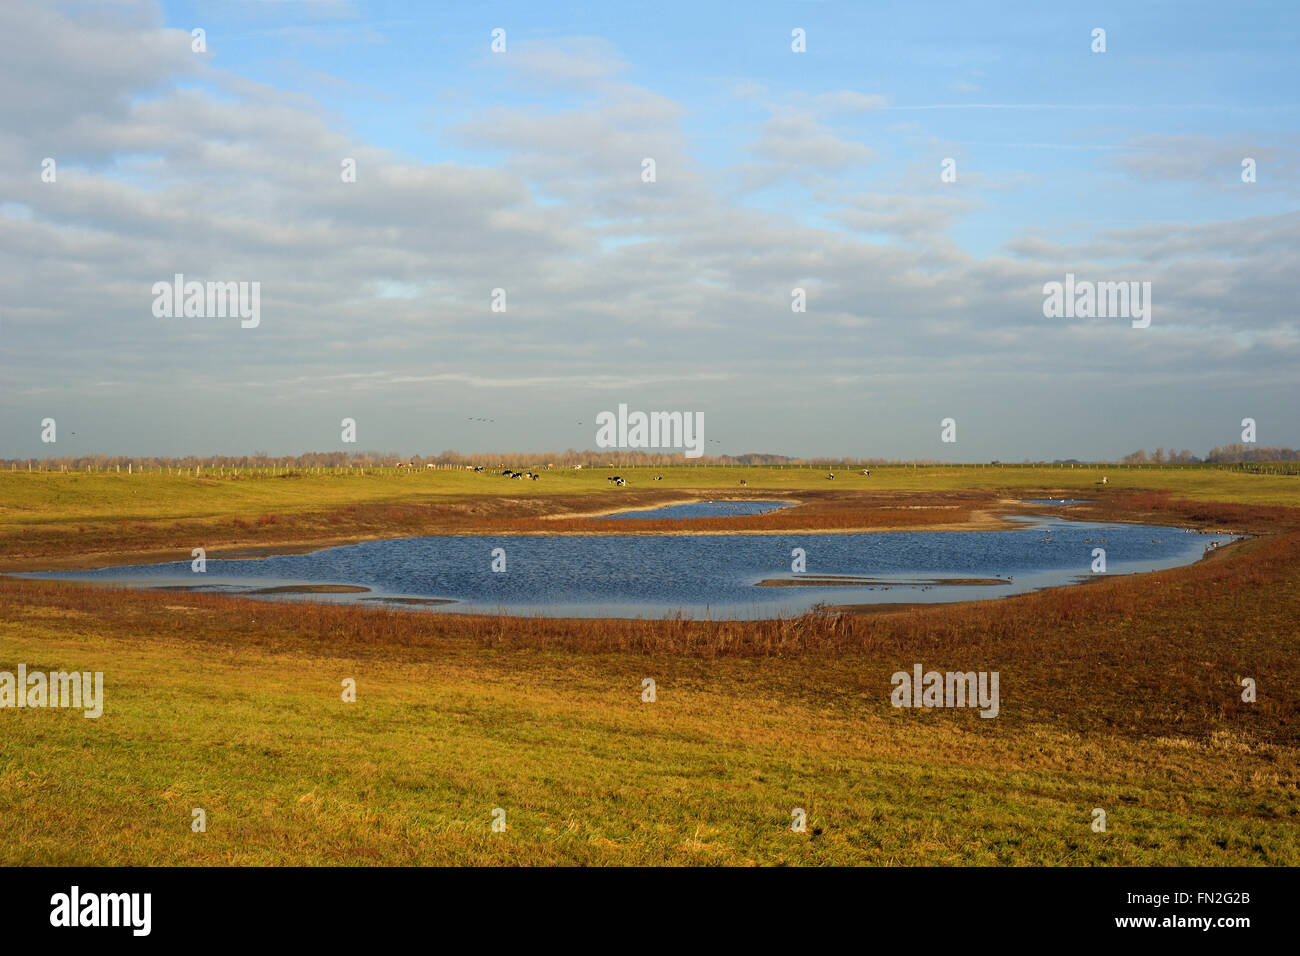 Flood plain, Bislicher Island, Germany, an international conserved resting place, nature reserve for thousands of arctic birds. Stock Photo